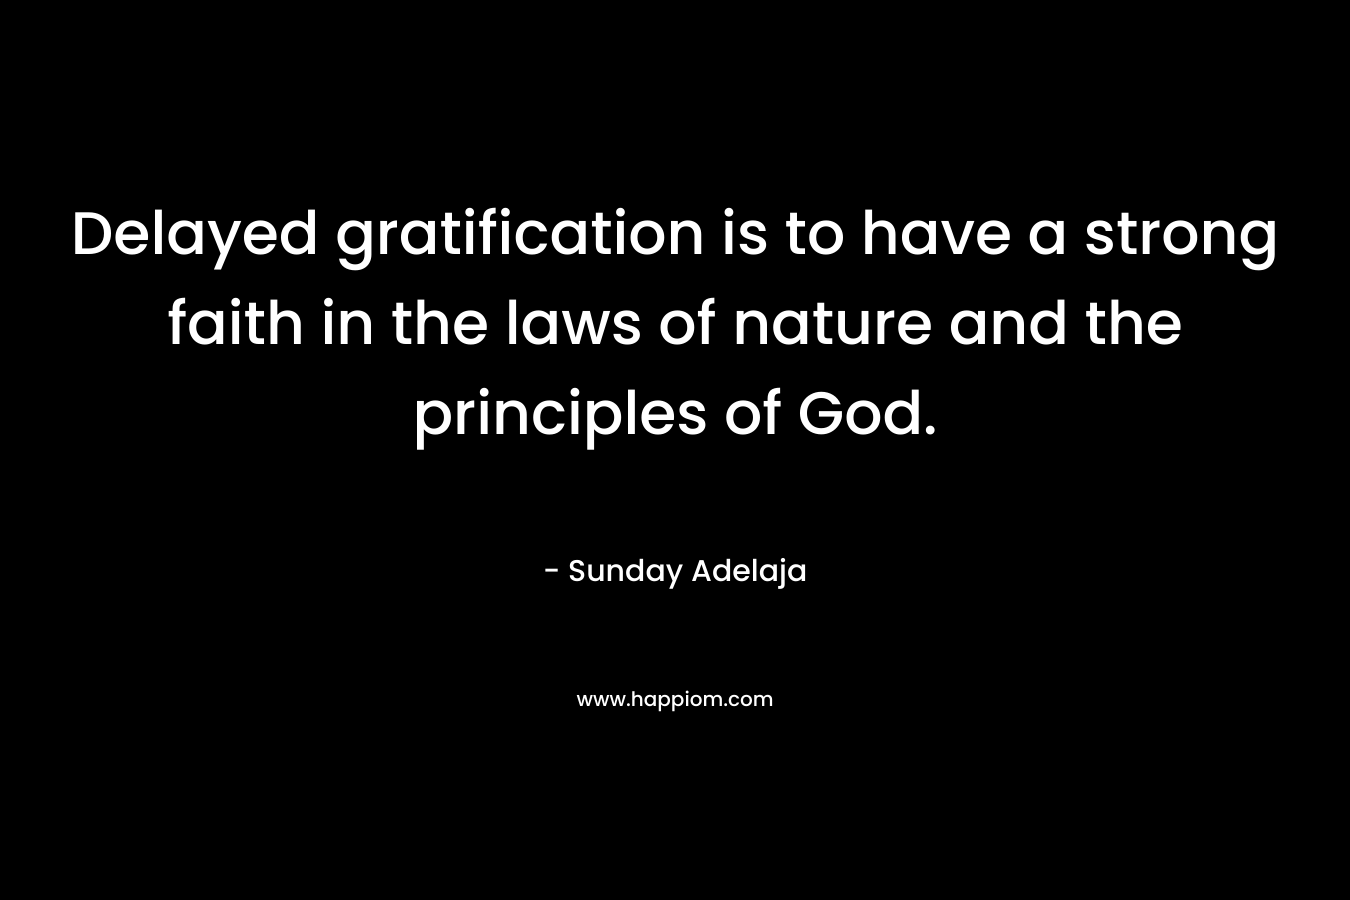 Delayed gratification is to have a strong faith in the laws of nature and the principles of God. – Sunday Adelaja